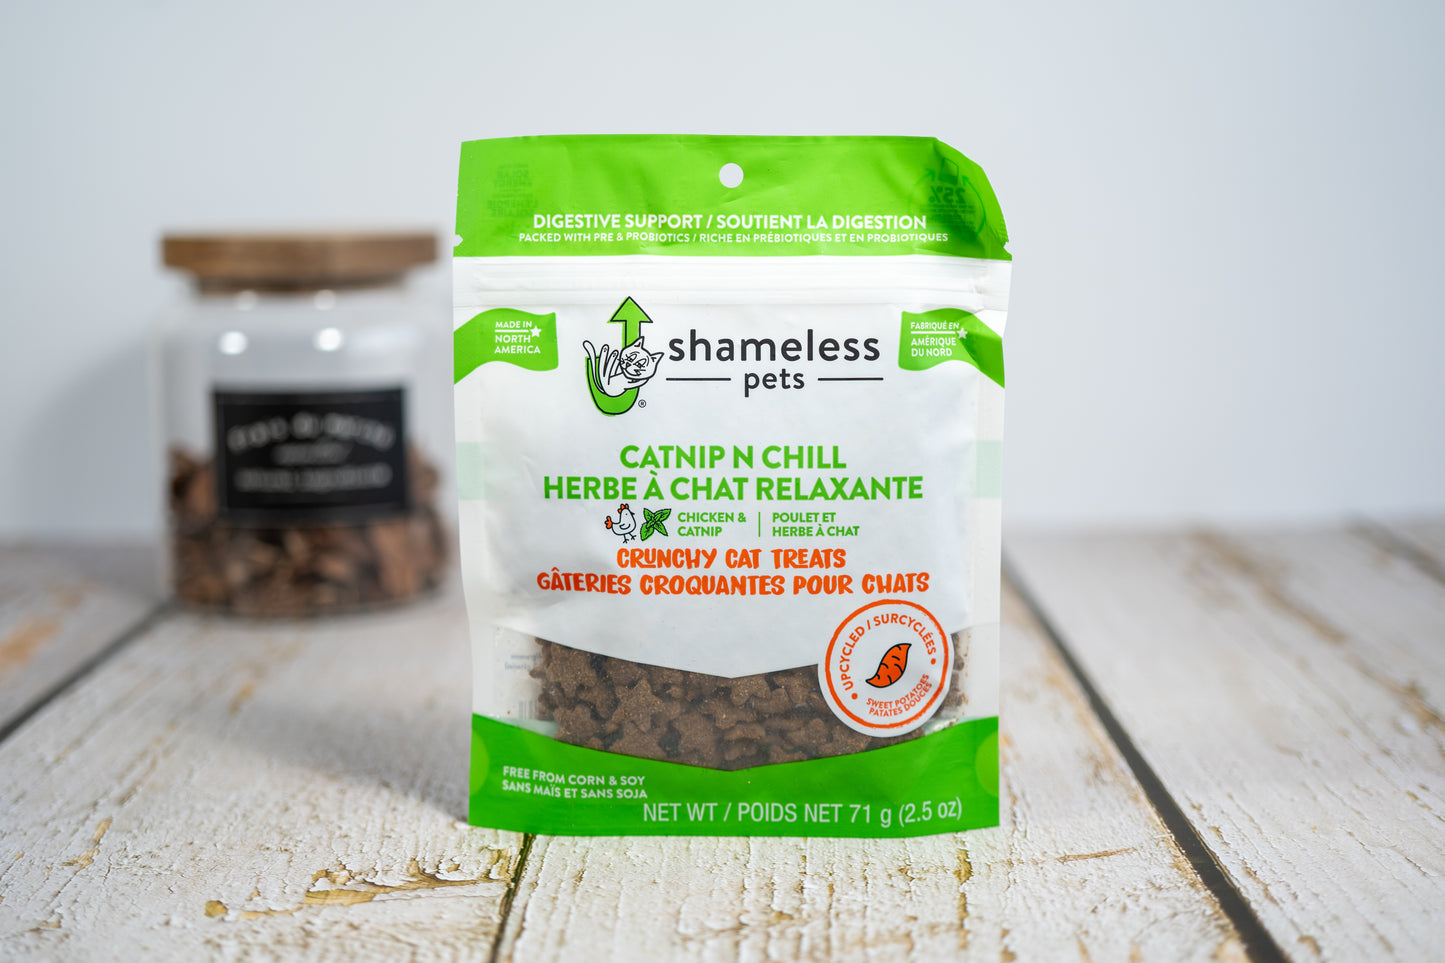 Shameless Pets Crunchy cat treats with chicken and catnip.